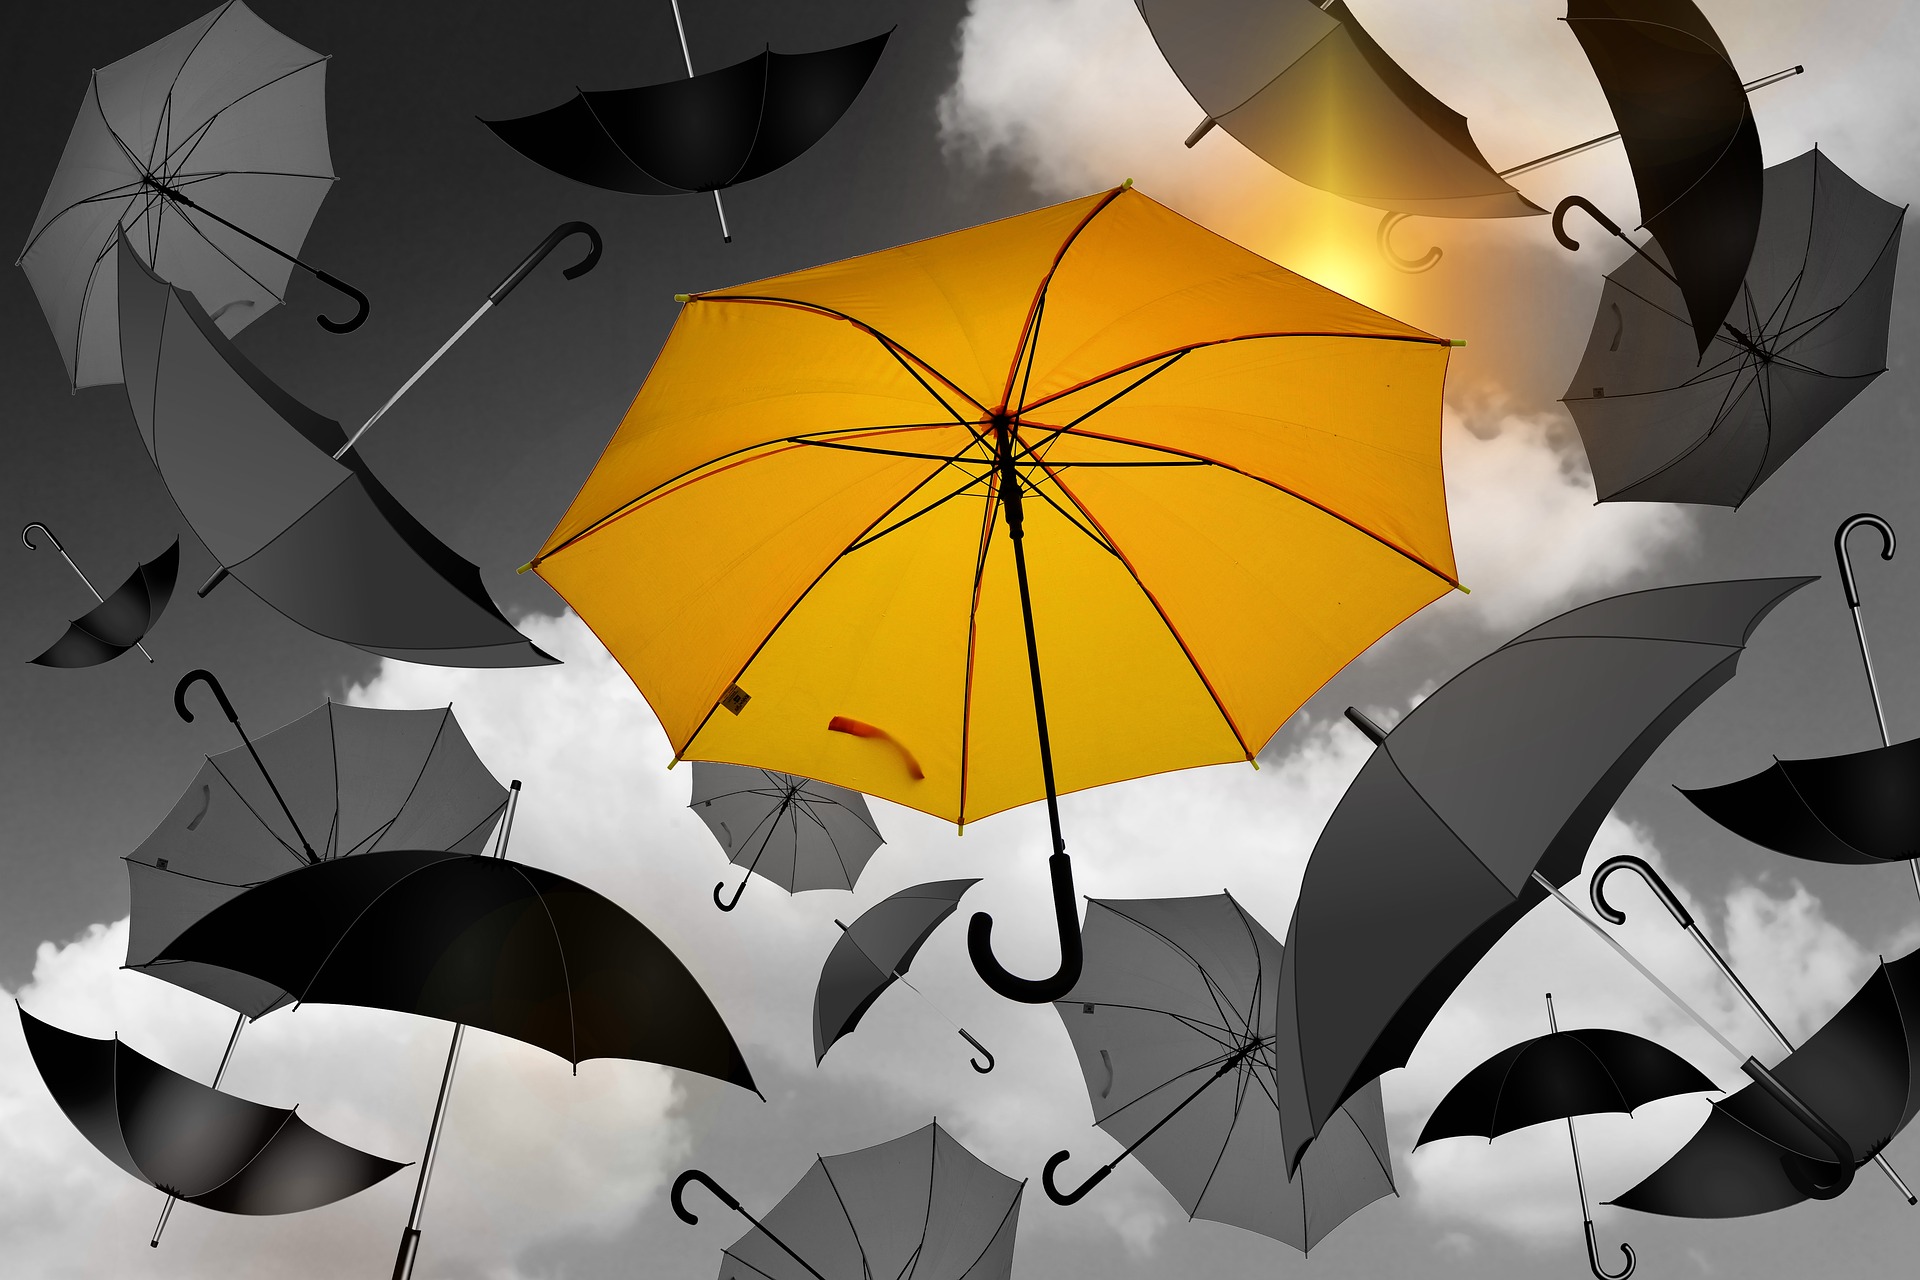 Image of several grey umbrellas floating in the sky. A single yellow umbrella floats in the middle of the picture in front of the grey umbrellas.